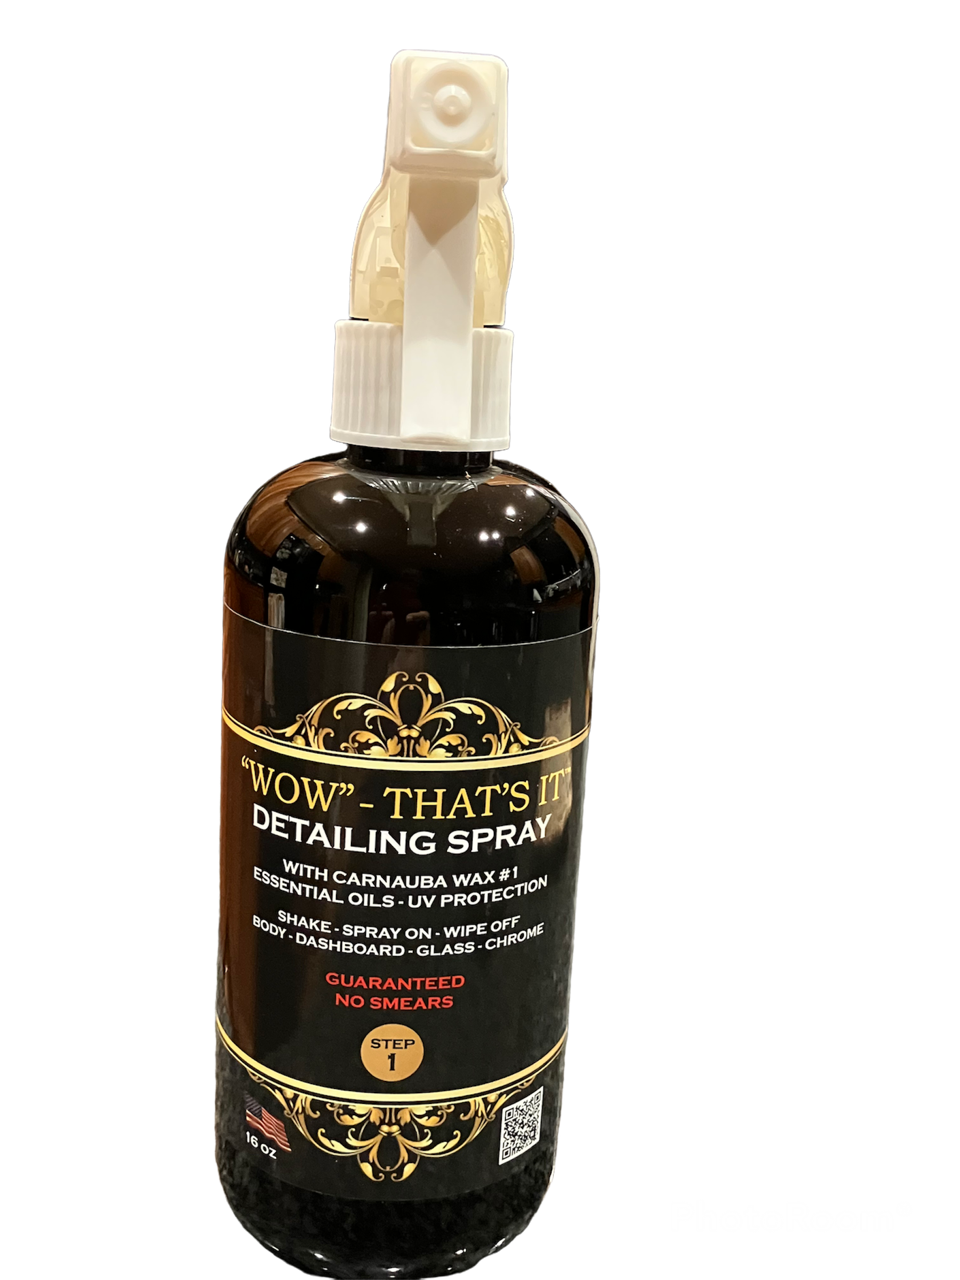 16 oz. WOW That's It Detailing Spray With Carnauba Wax #1 & Essential  Oils-Use in Temps 32-175*F (Click Picture For Video)